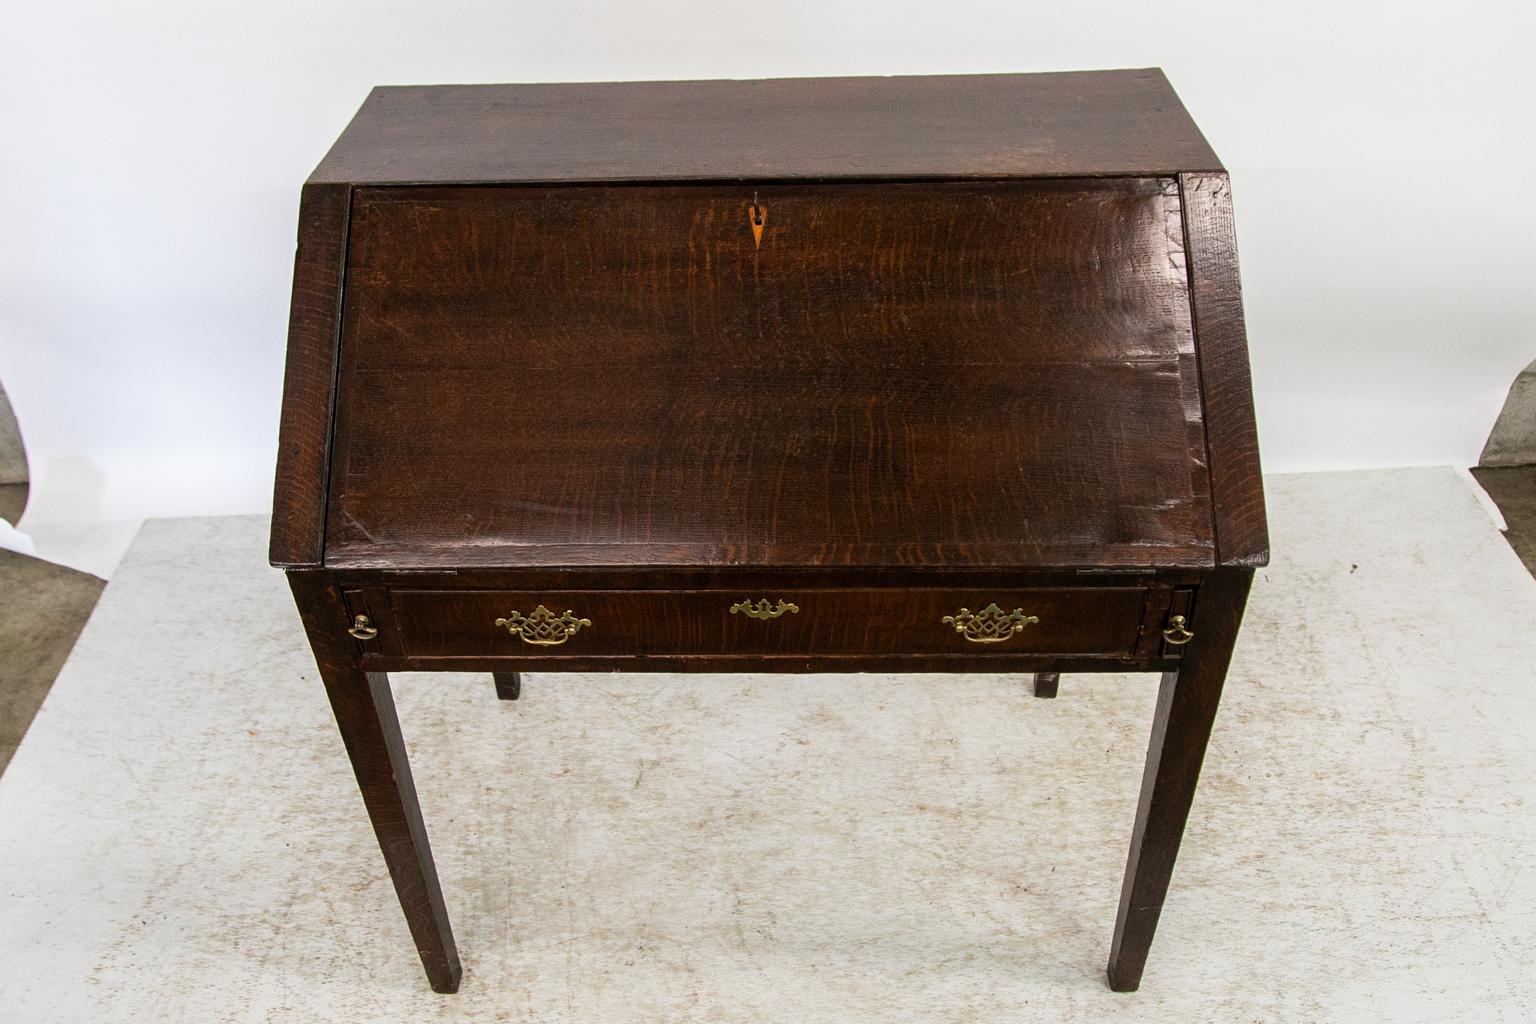 The leather writing surfaces on this desk have been newly restored with blind and gold tooling. The inside prospect door has a working lock and key.